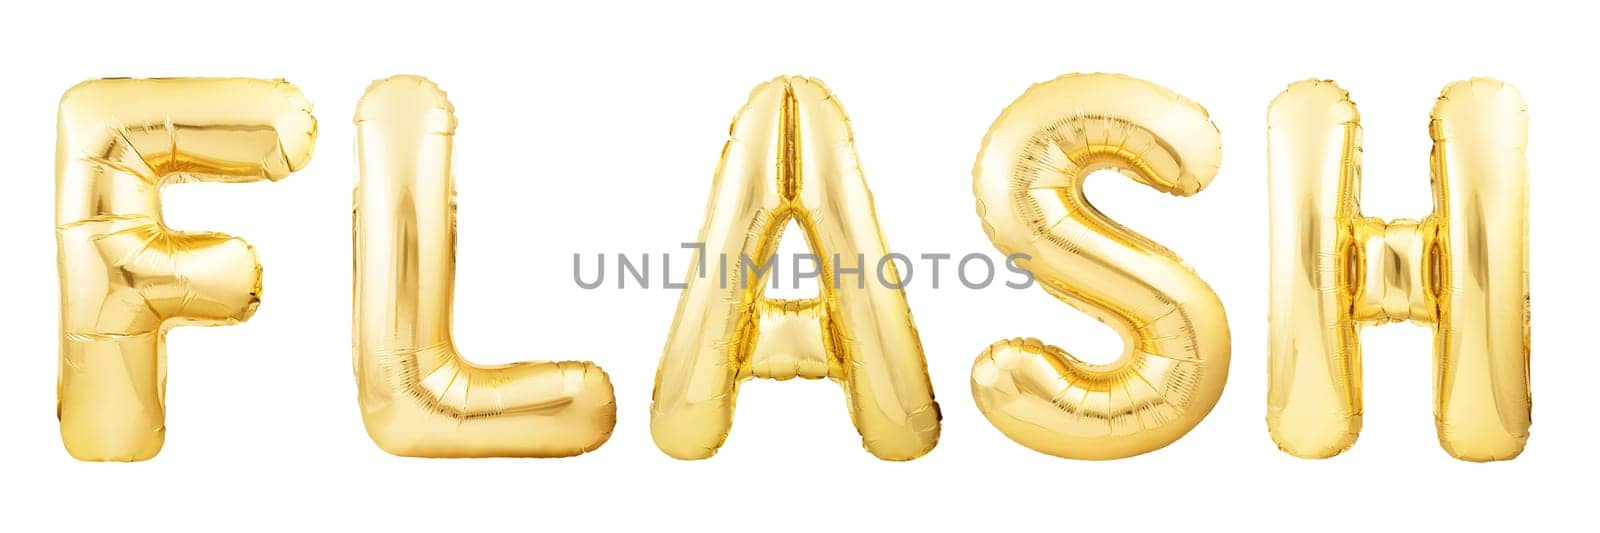 Word flash made of golden inflatable balloons isolated on white background. Helium balloons forming word flash